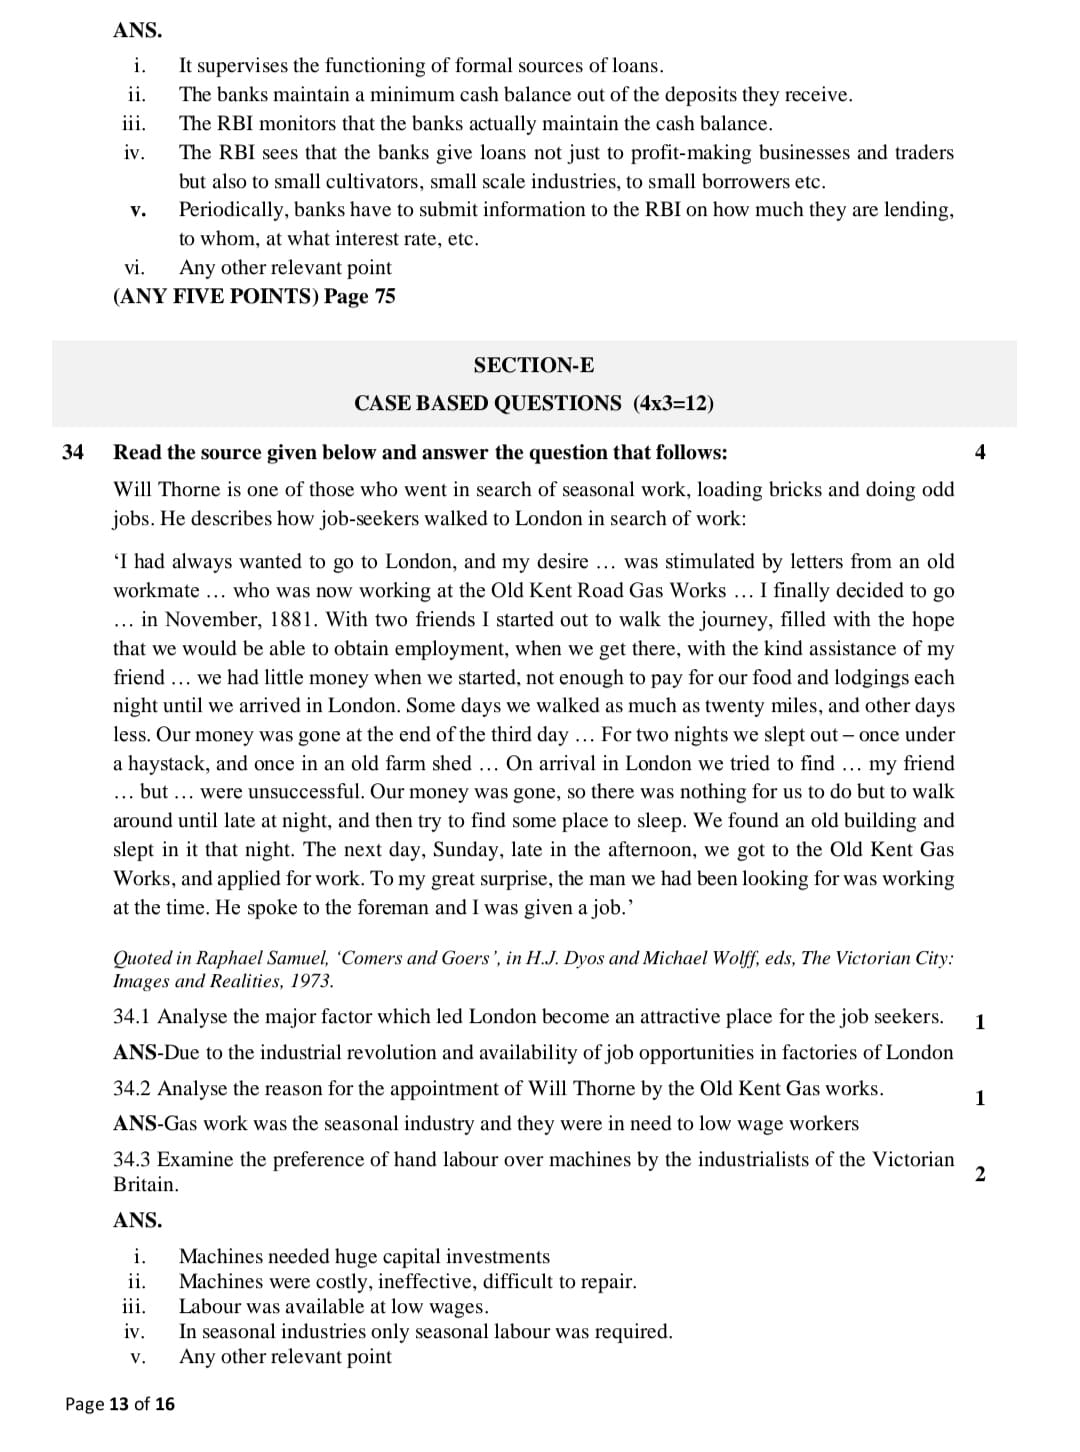 cbse class 10 social science official sample question paper13